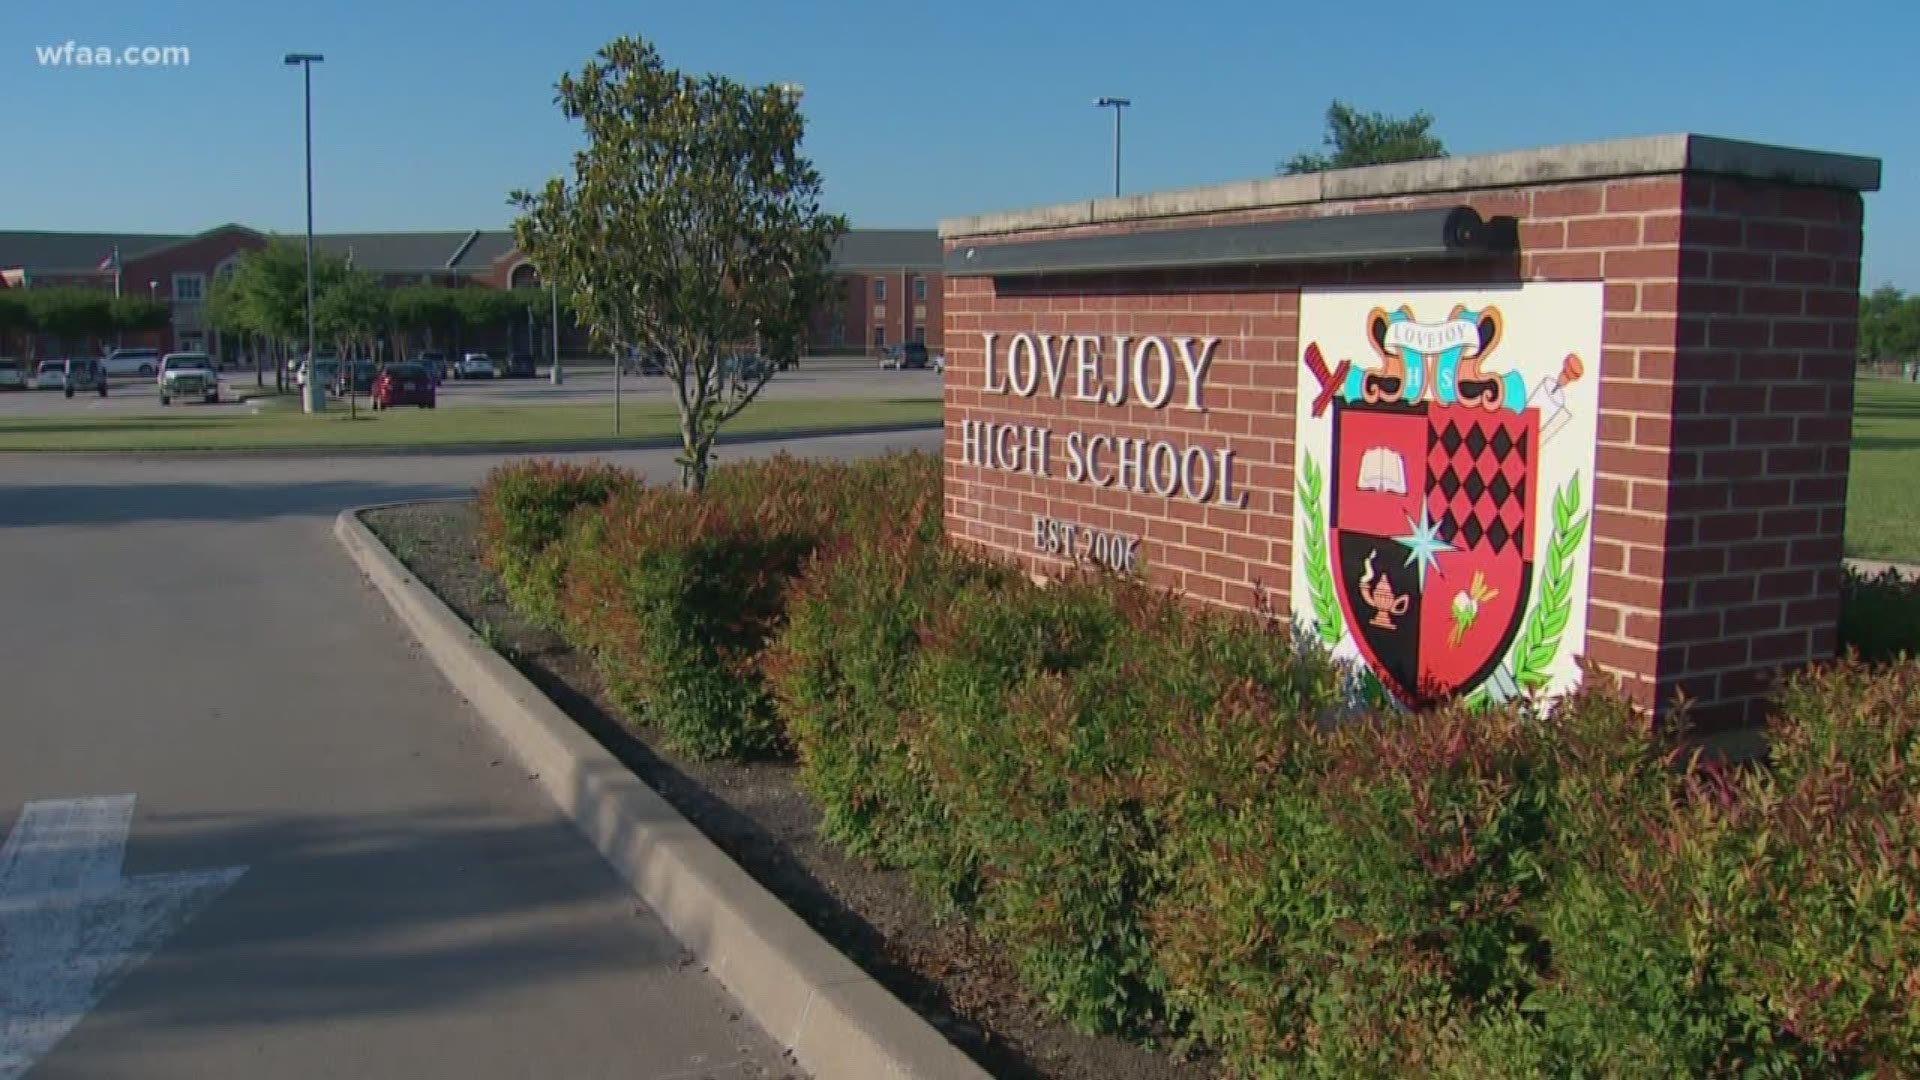 High performing Lovejoy ISD isn't immune from the effects of state budget constraints. Over the last 8 years, the district has lost out on $25 million in state aid.